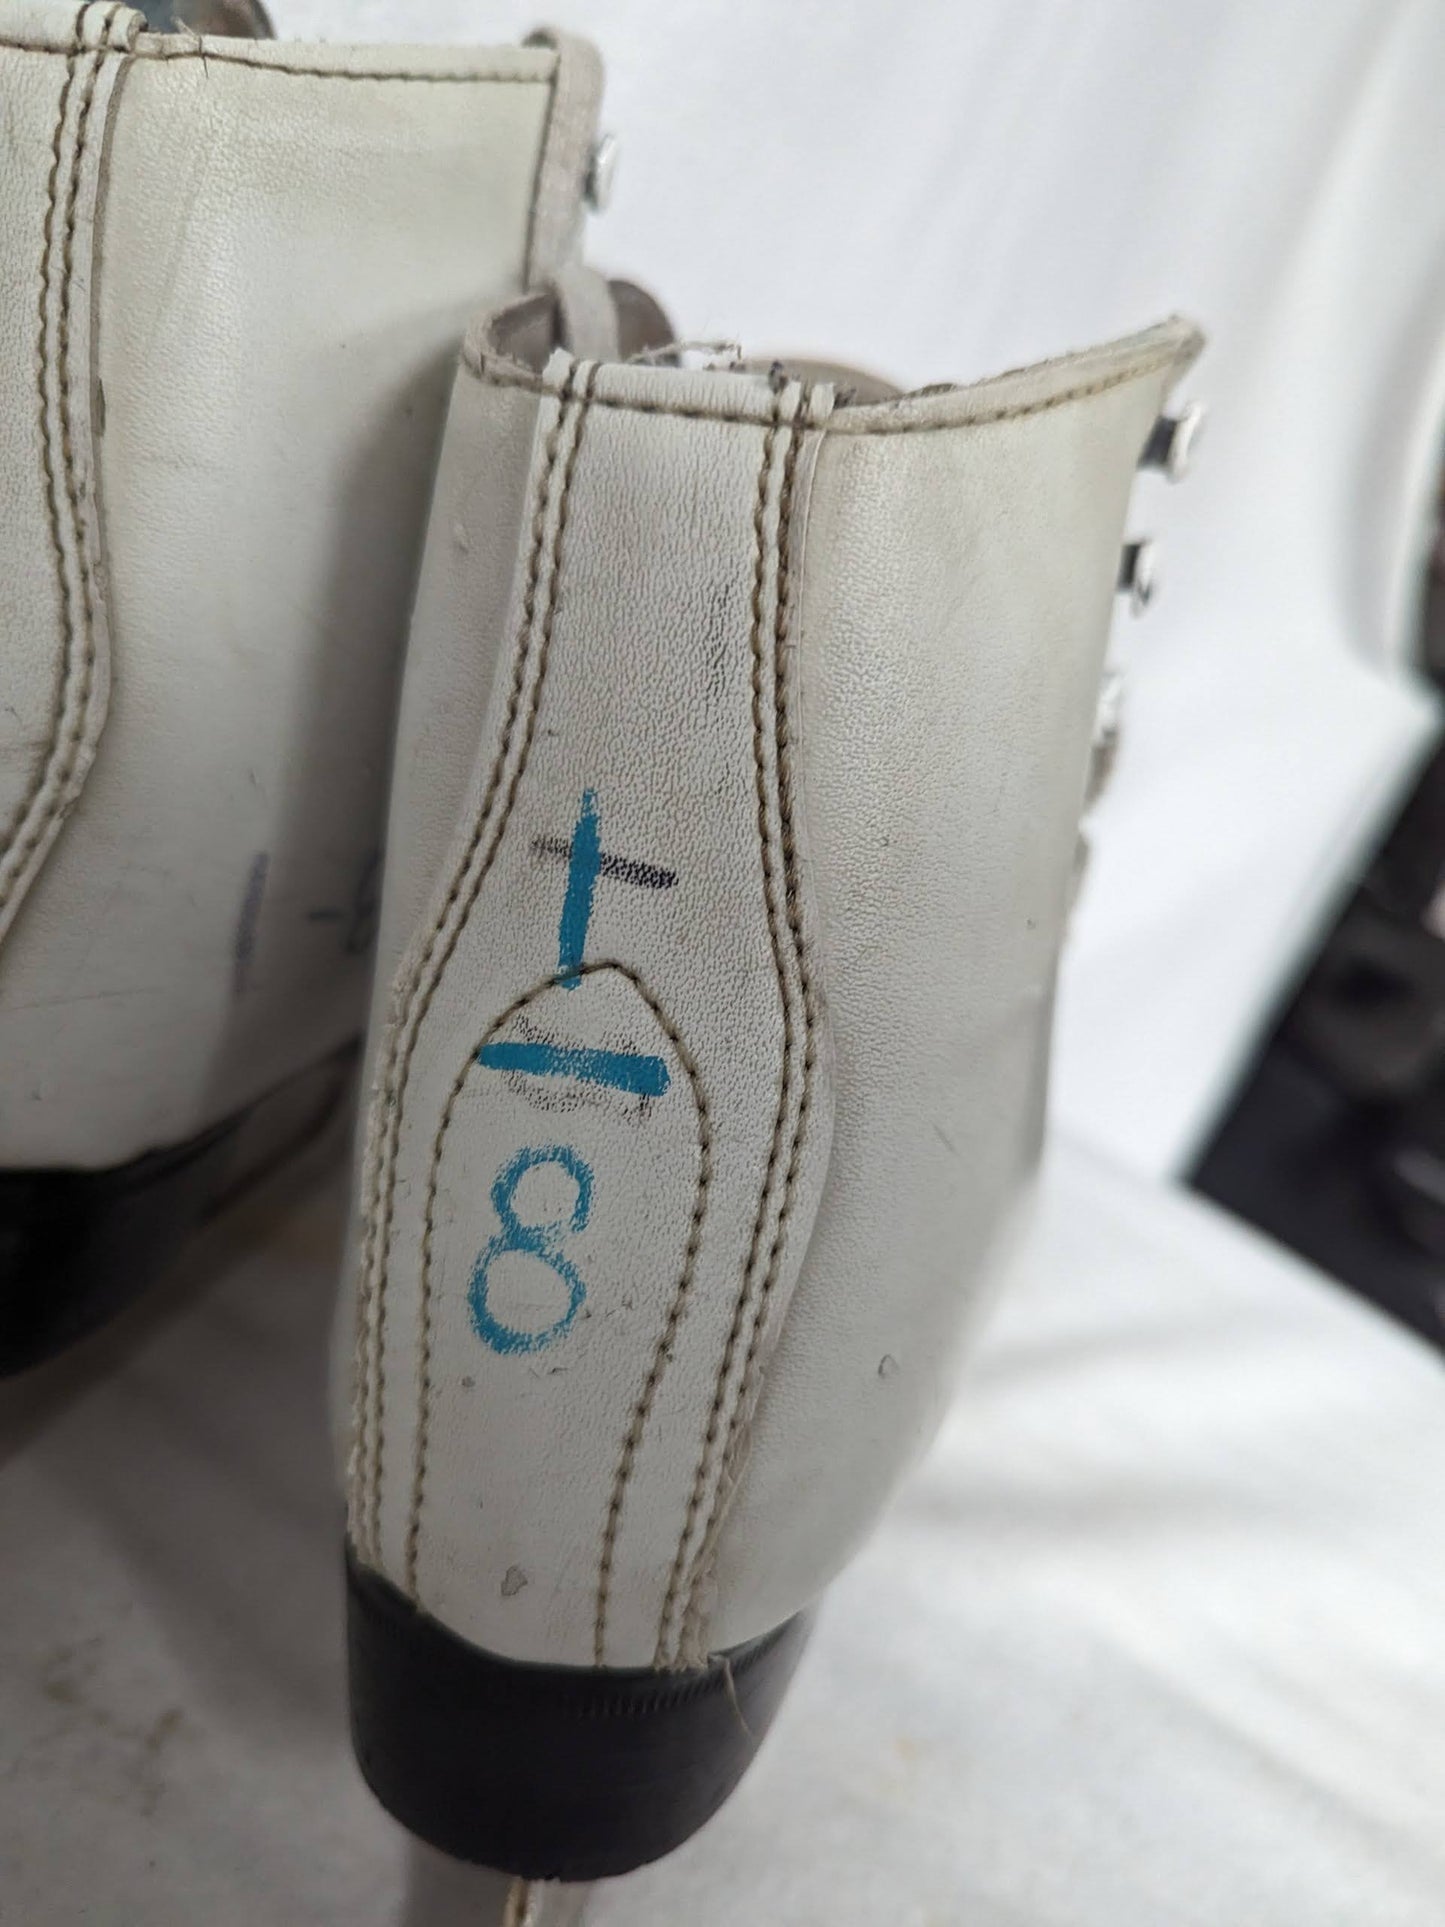 Hespeler Figure Ice Skates Size 1 Color White Condition Used